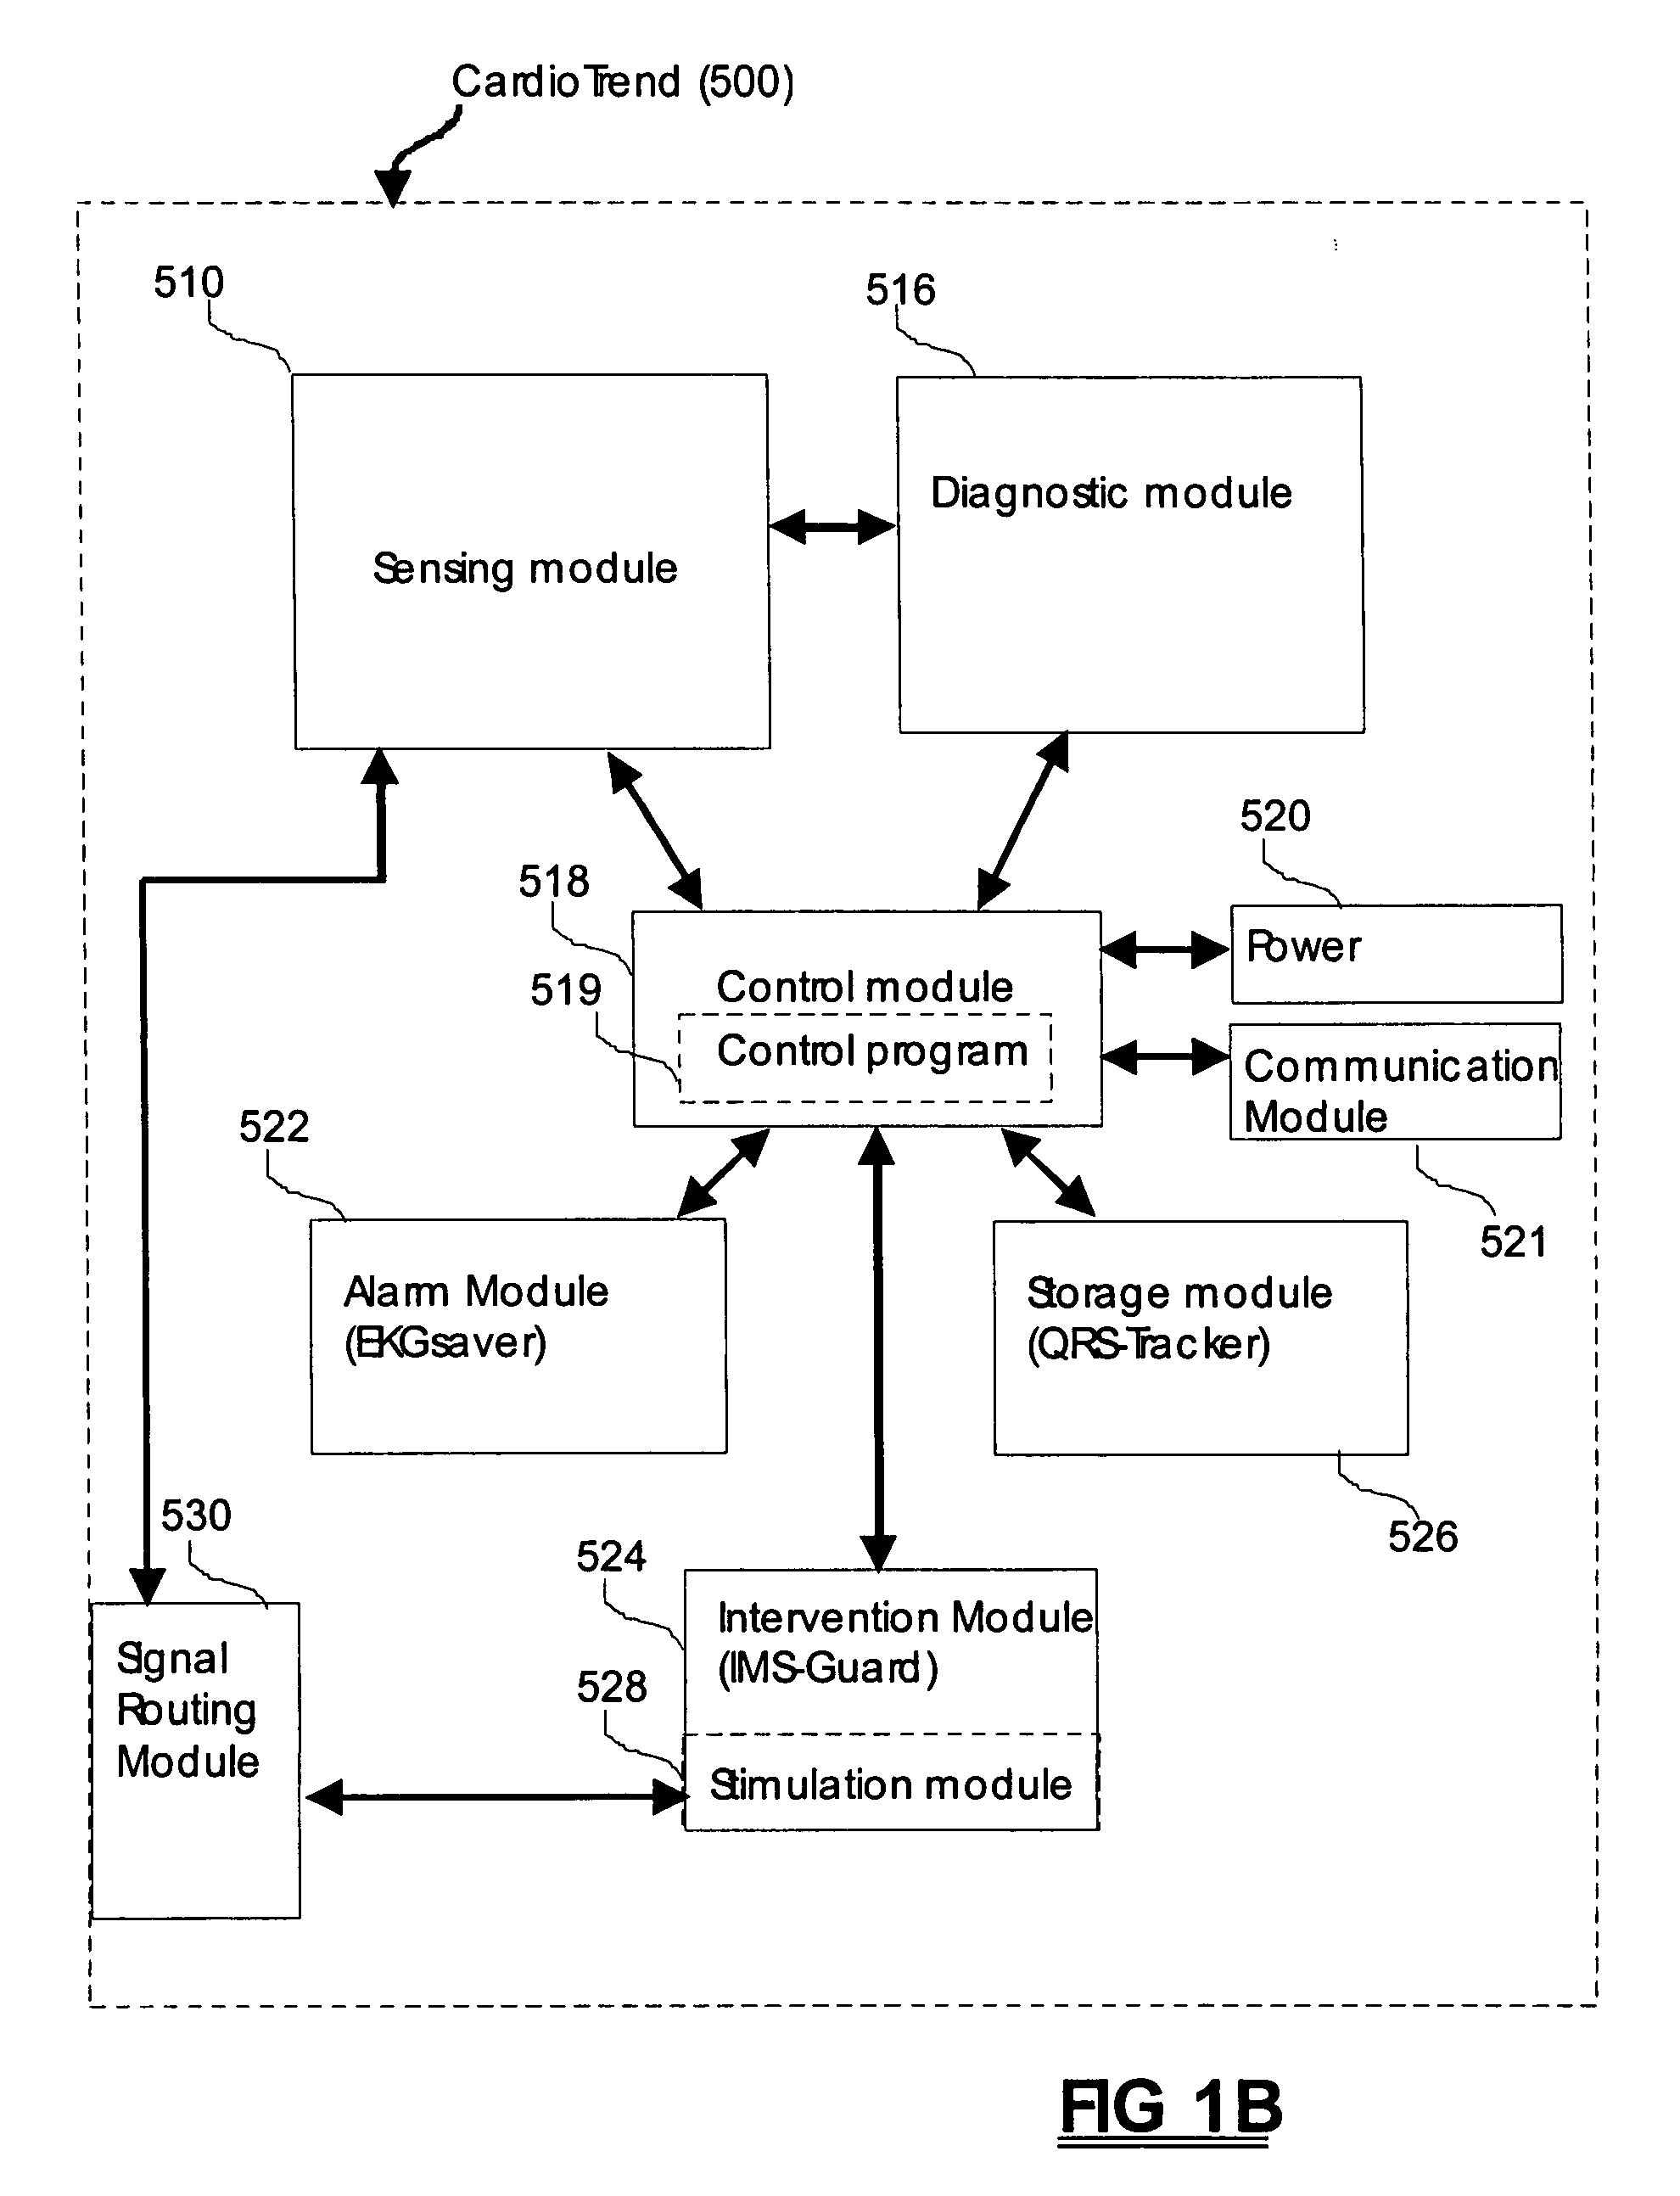 Systems and methods of medical monitoring according to patient state